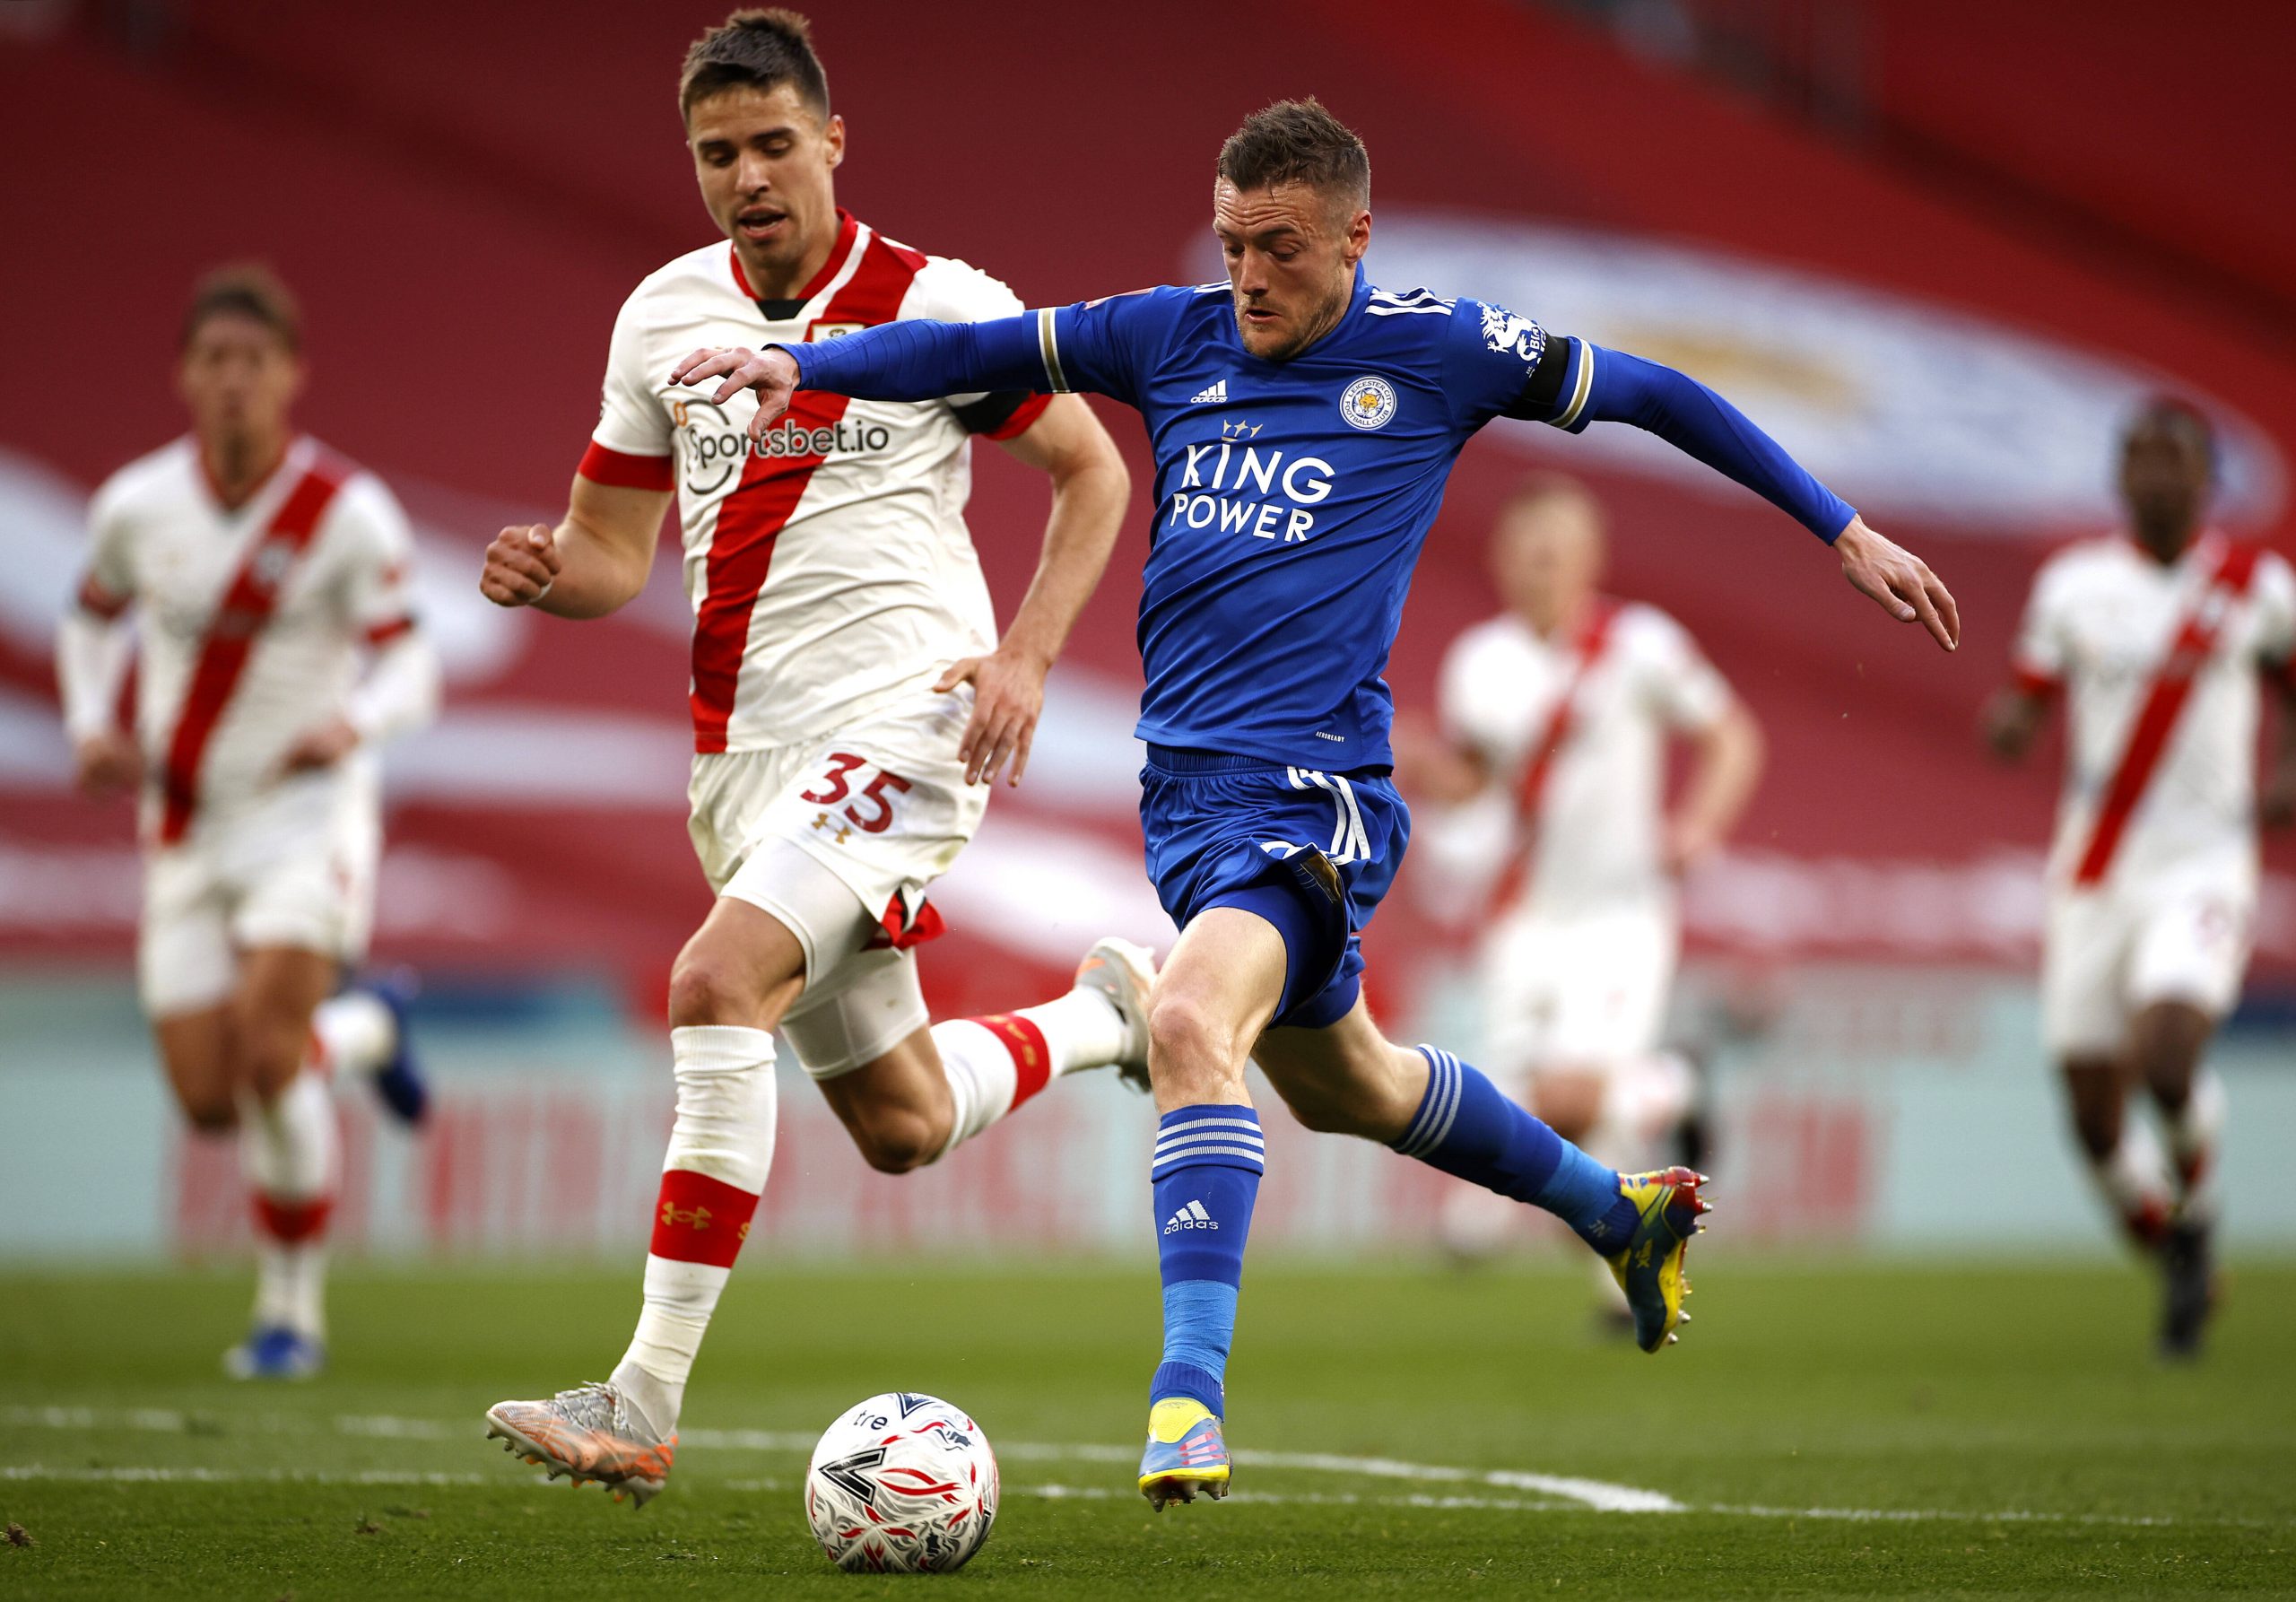 Leicester City against Southampton. (imago Images)